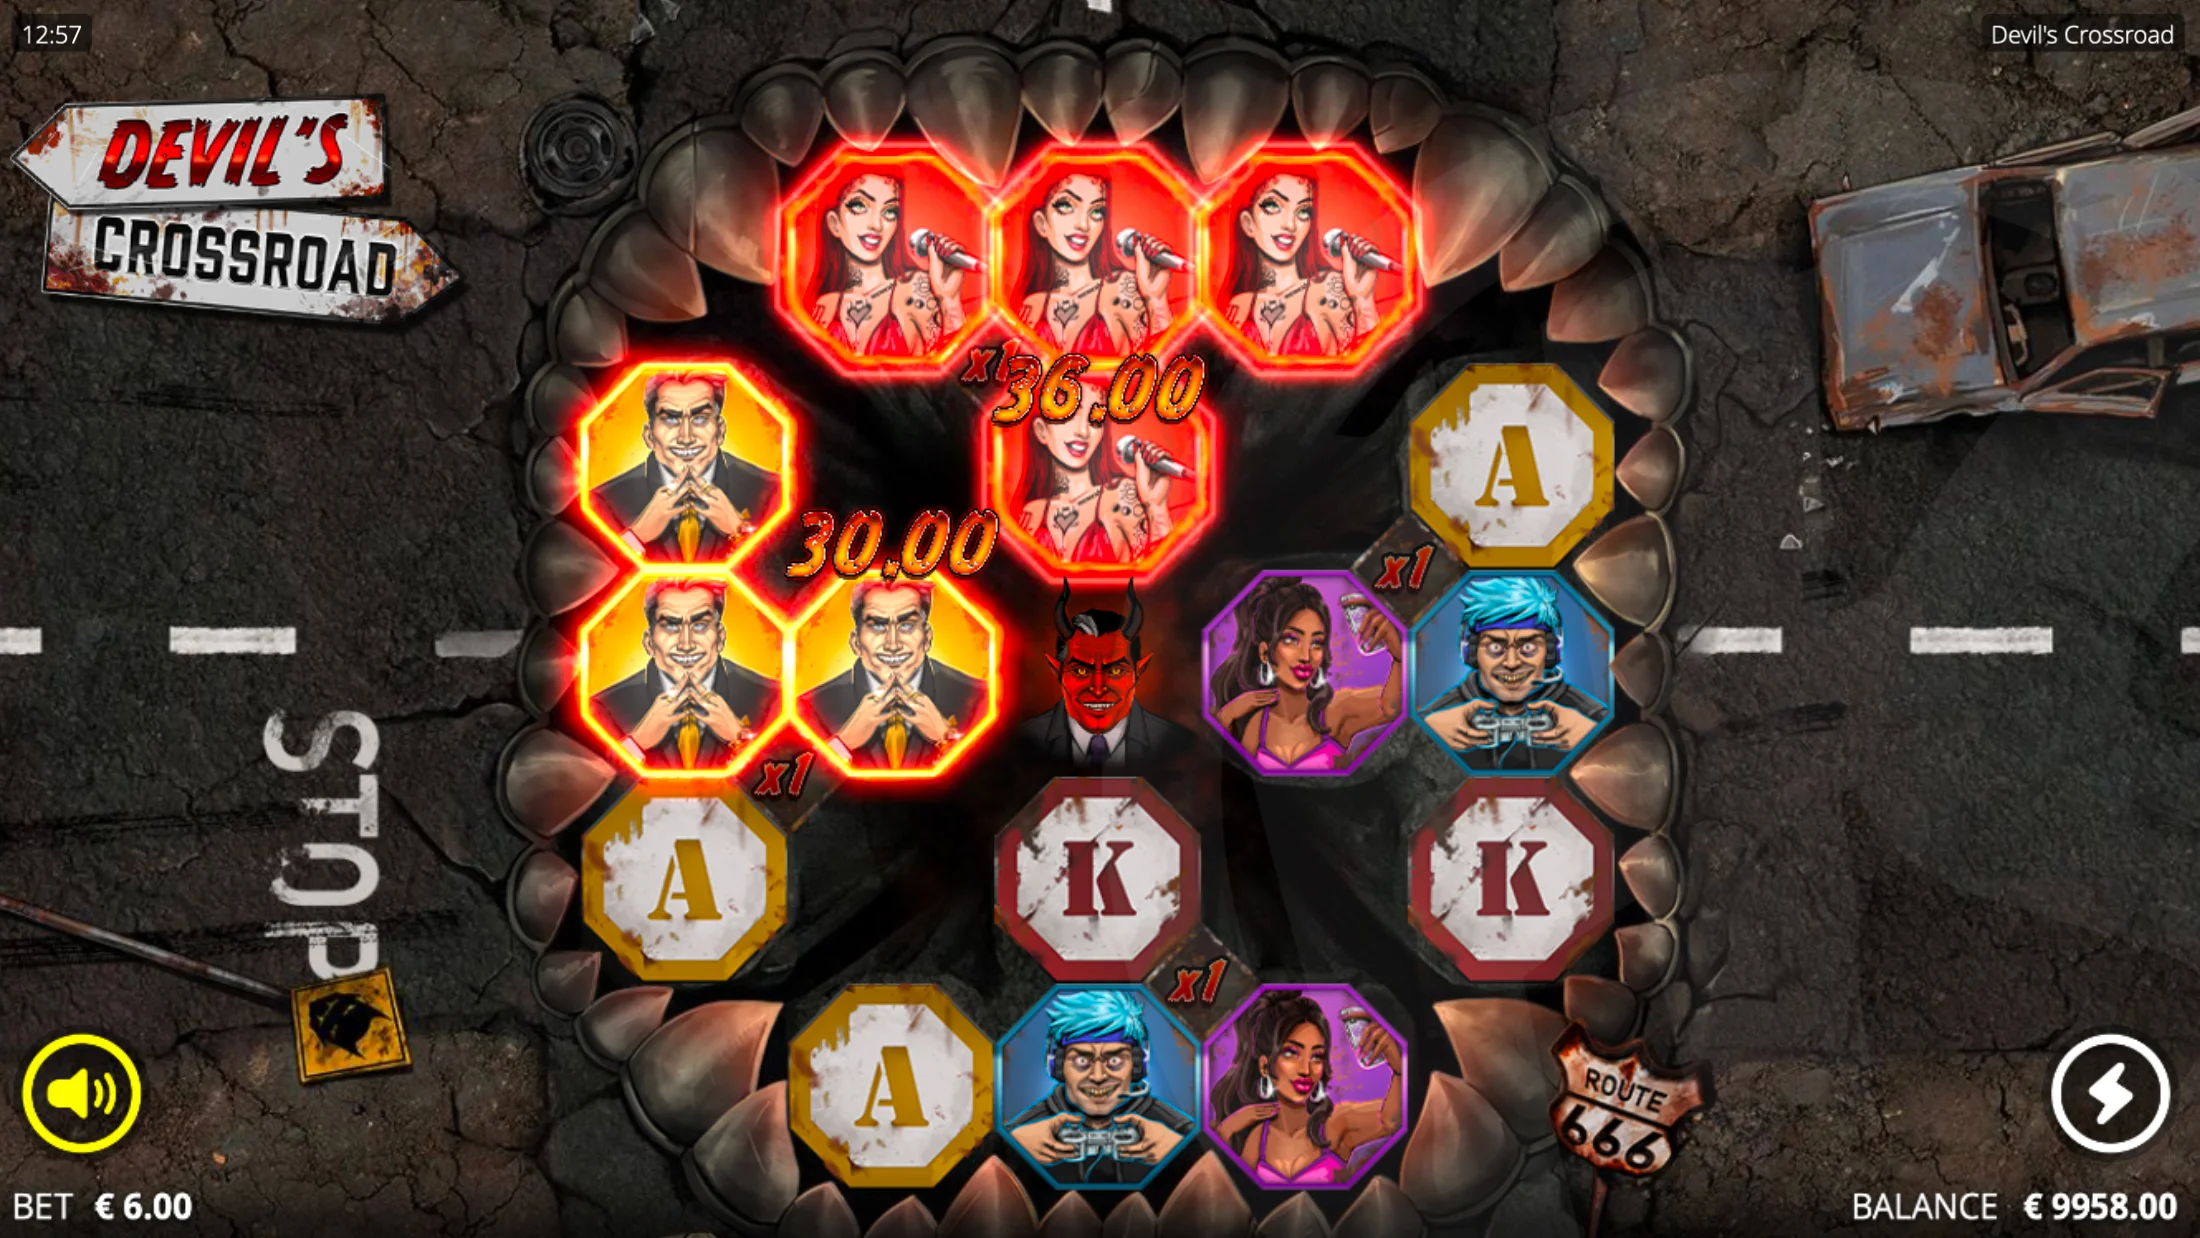 Devil's Crossroad Offers Players Crosslink Wins Moving From Each Side Towards the Center